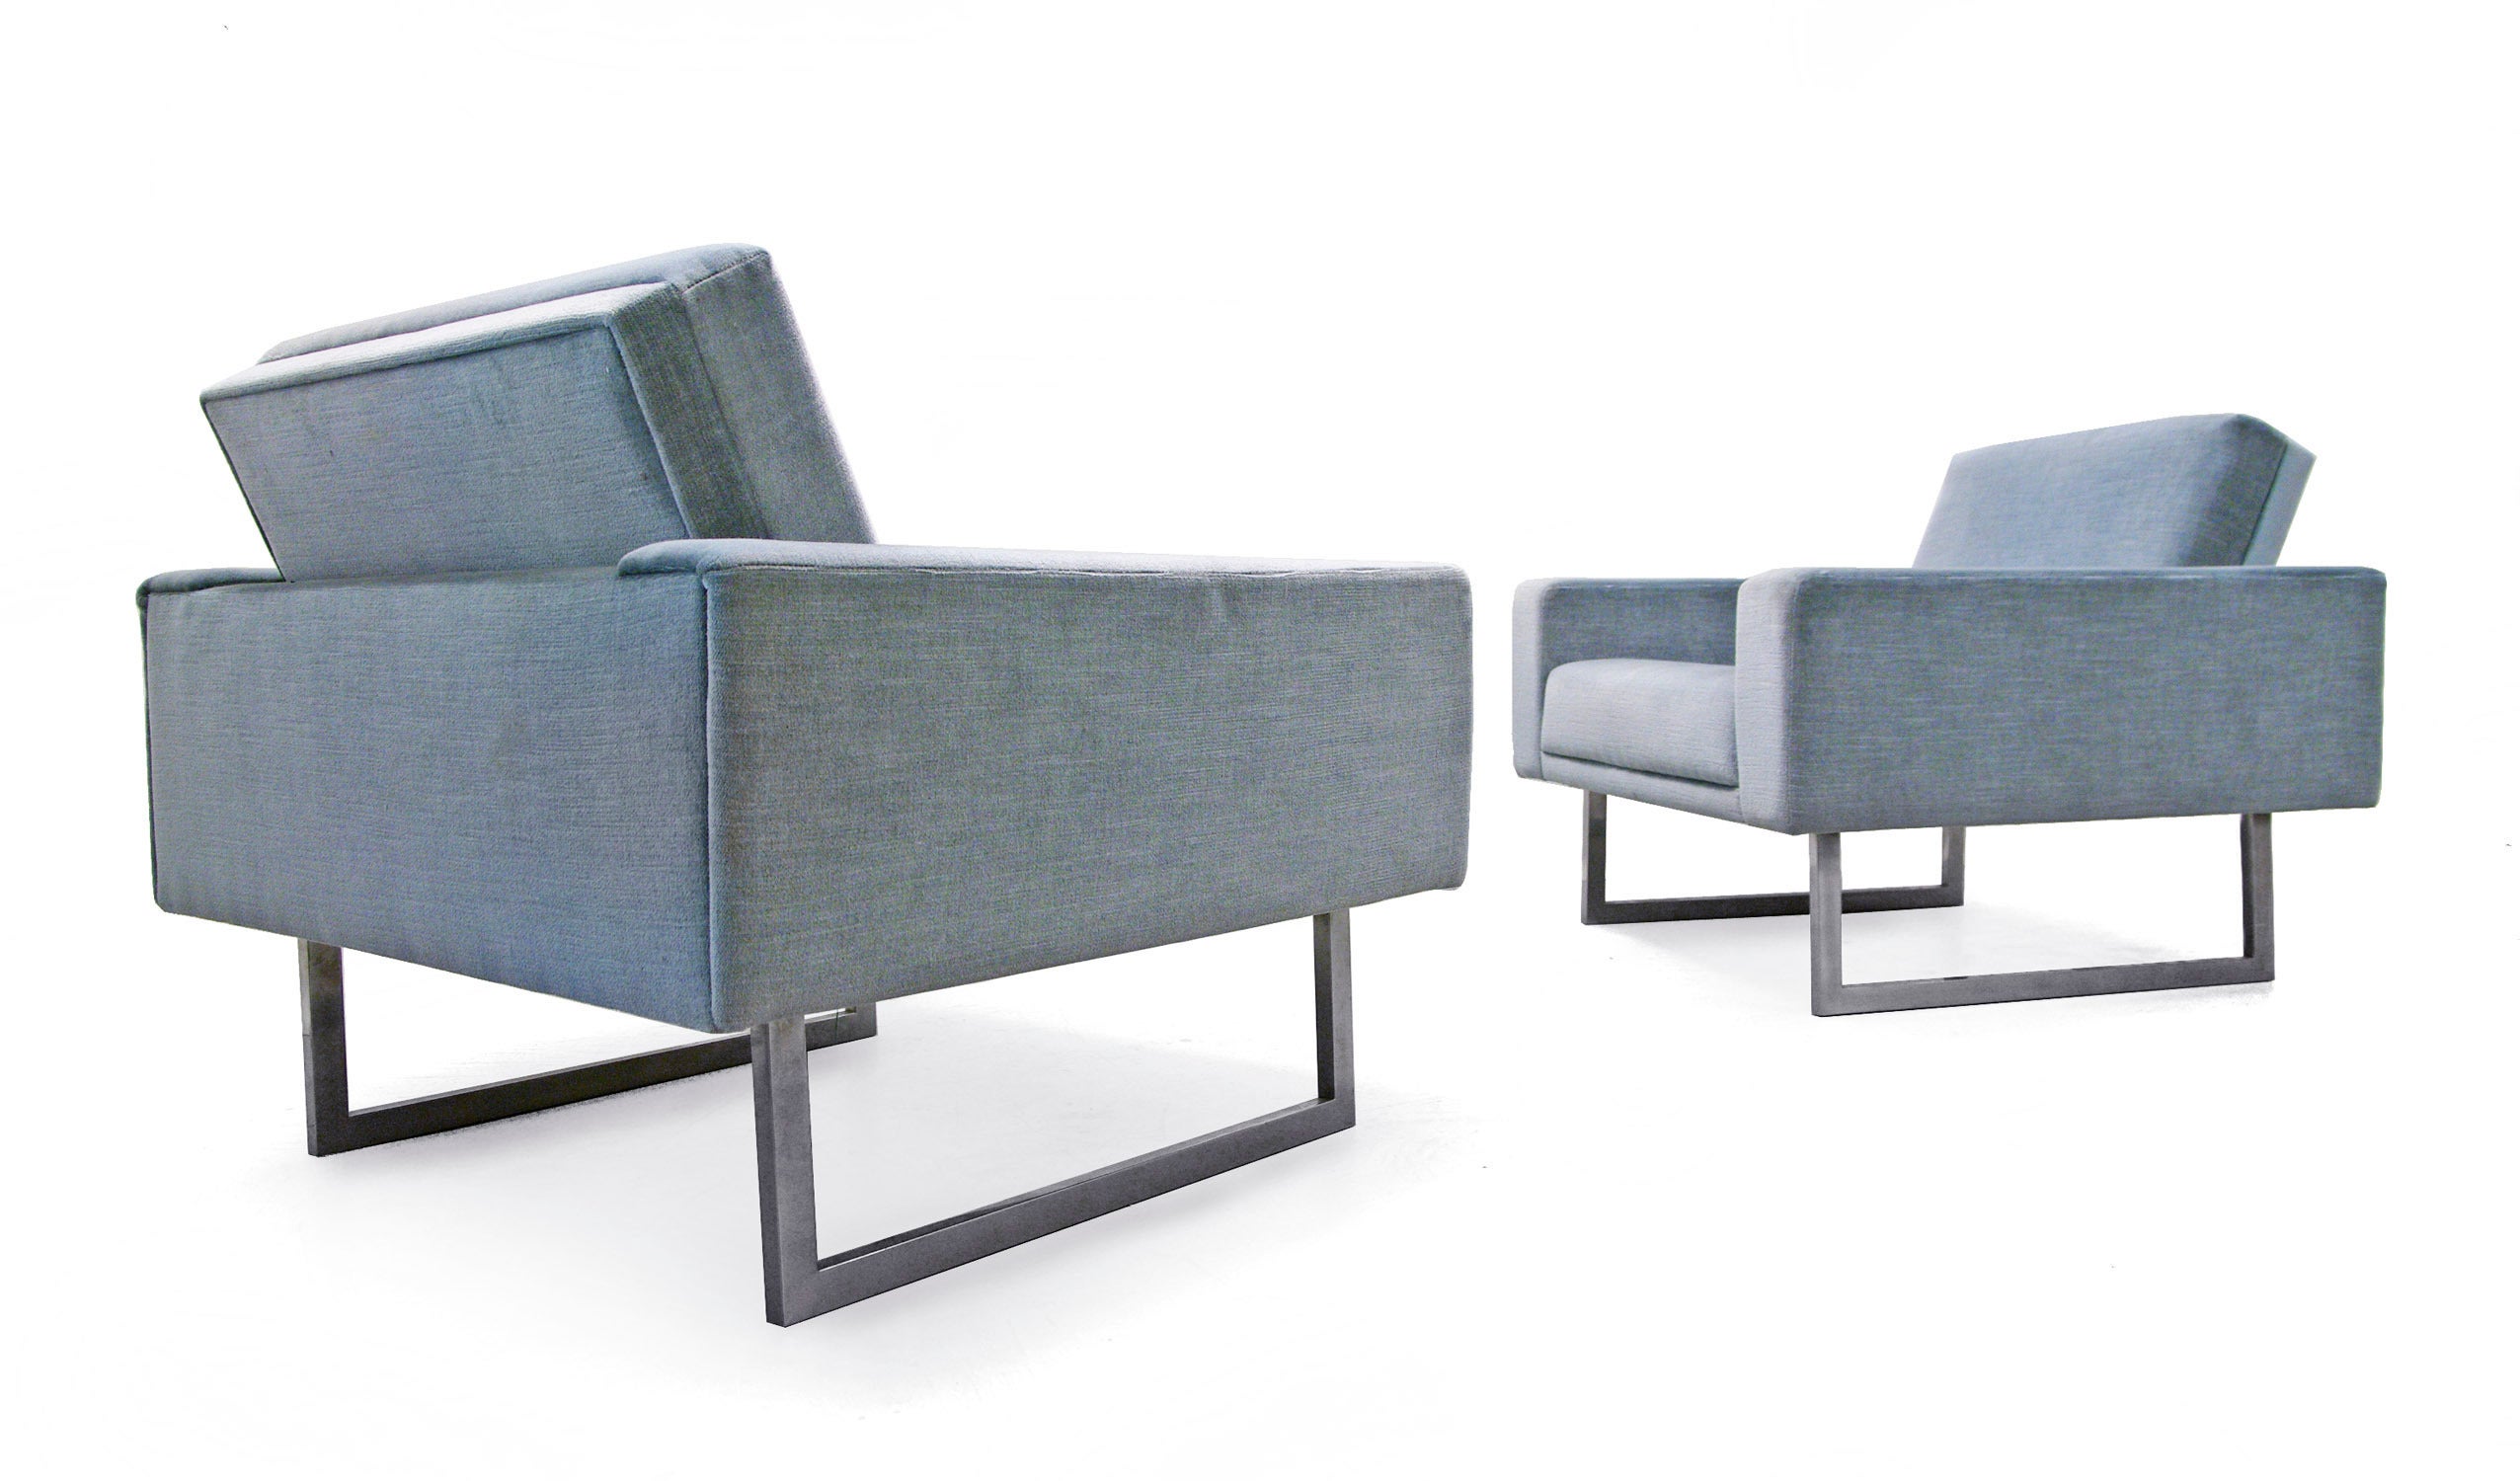 set of 2 arm-chairs by Carl Auböck for Cor Matura 1964